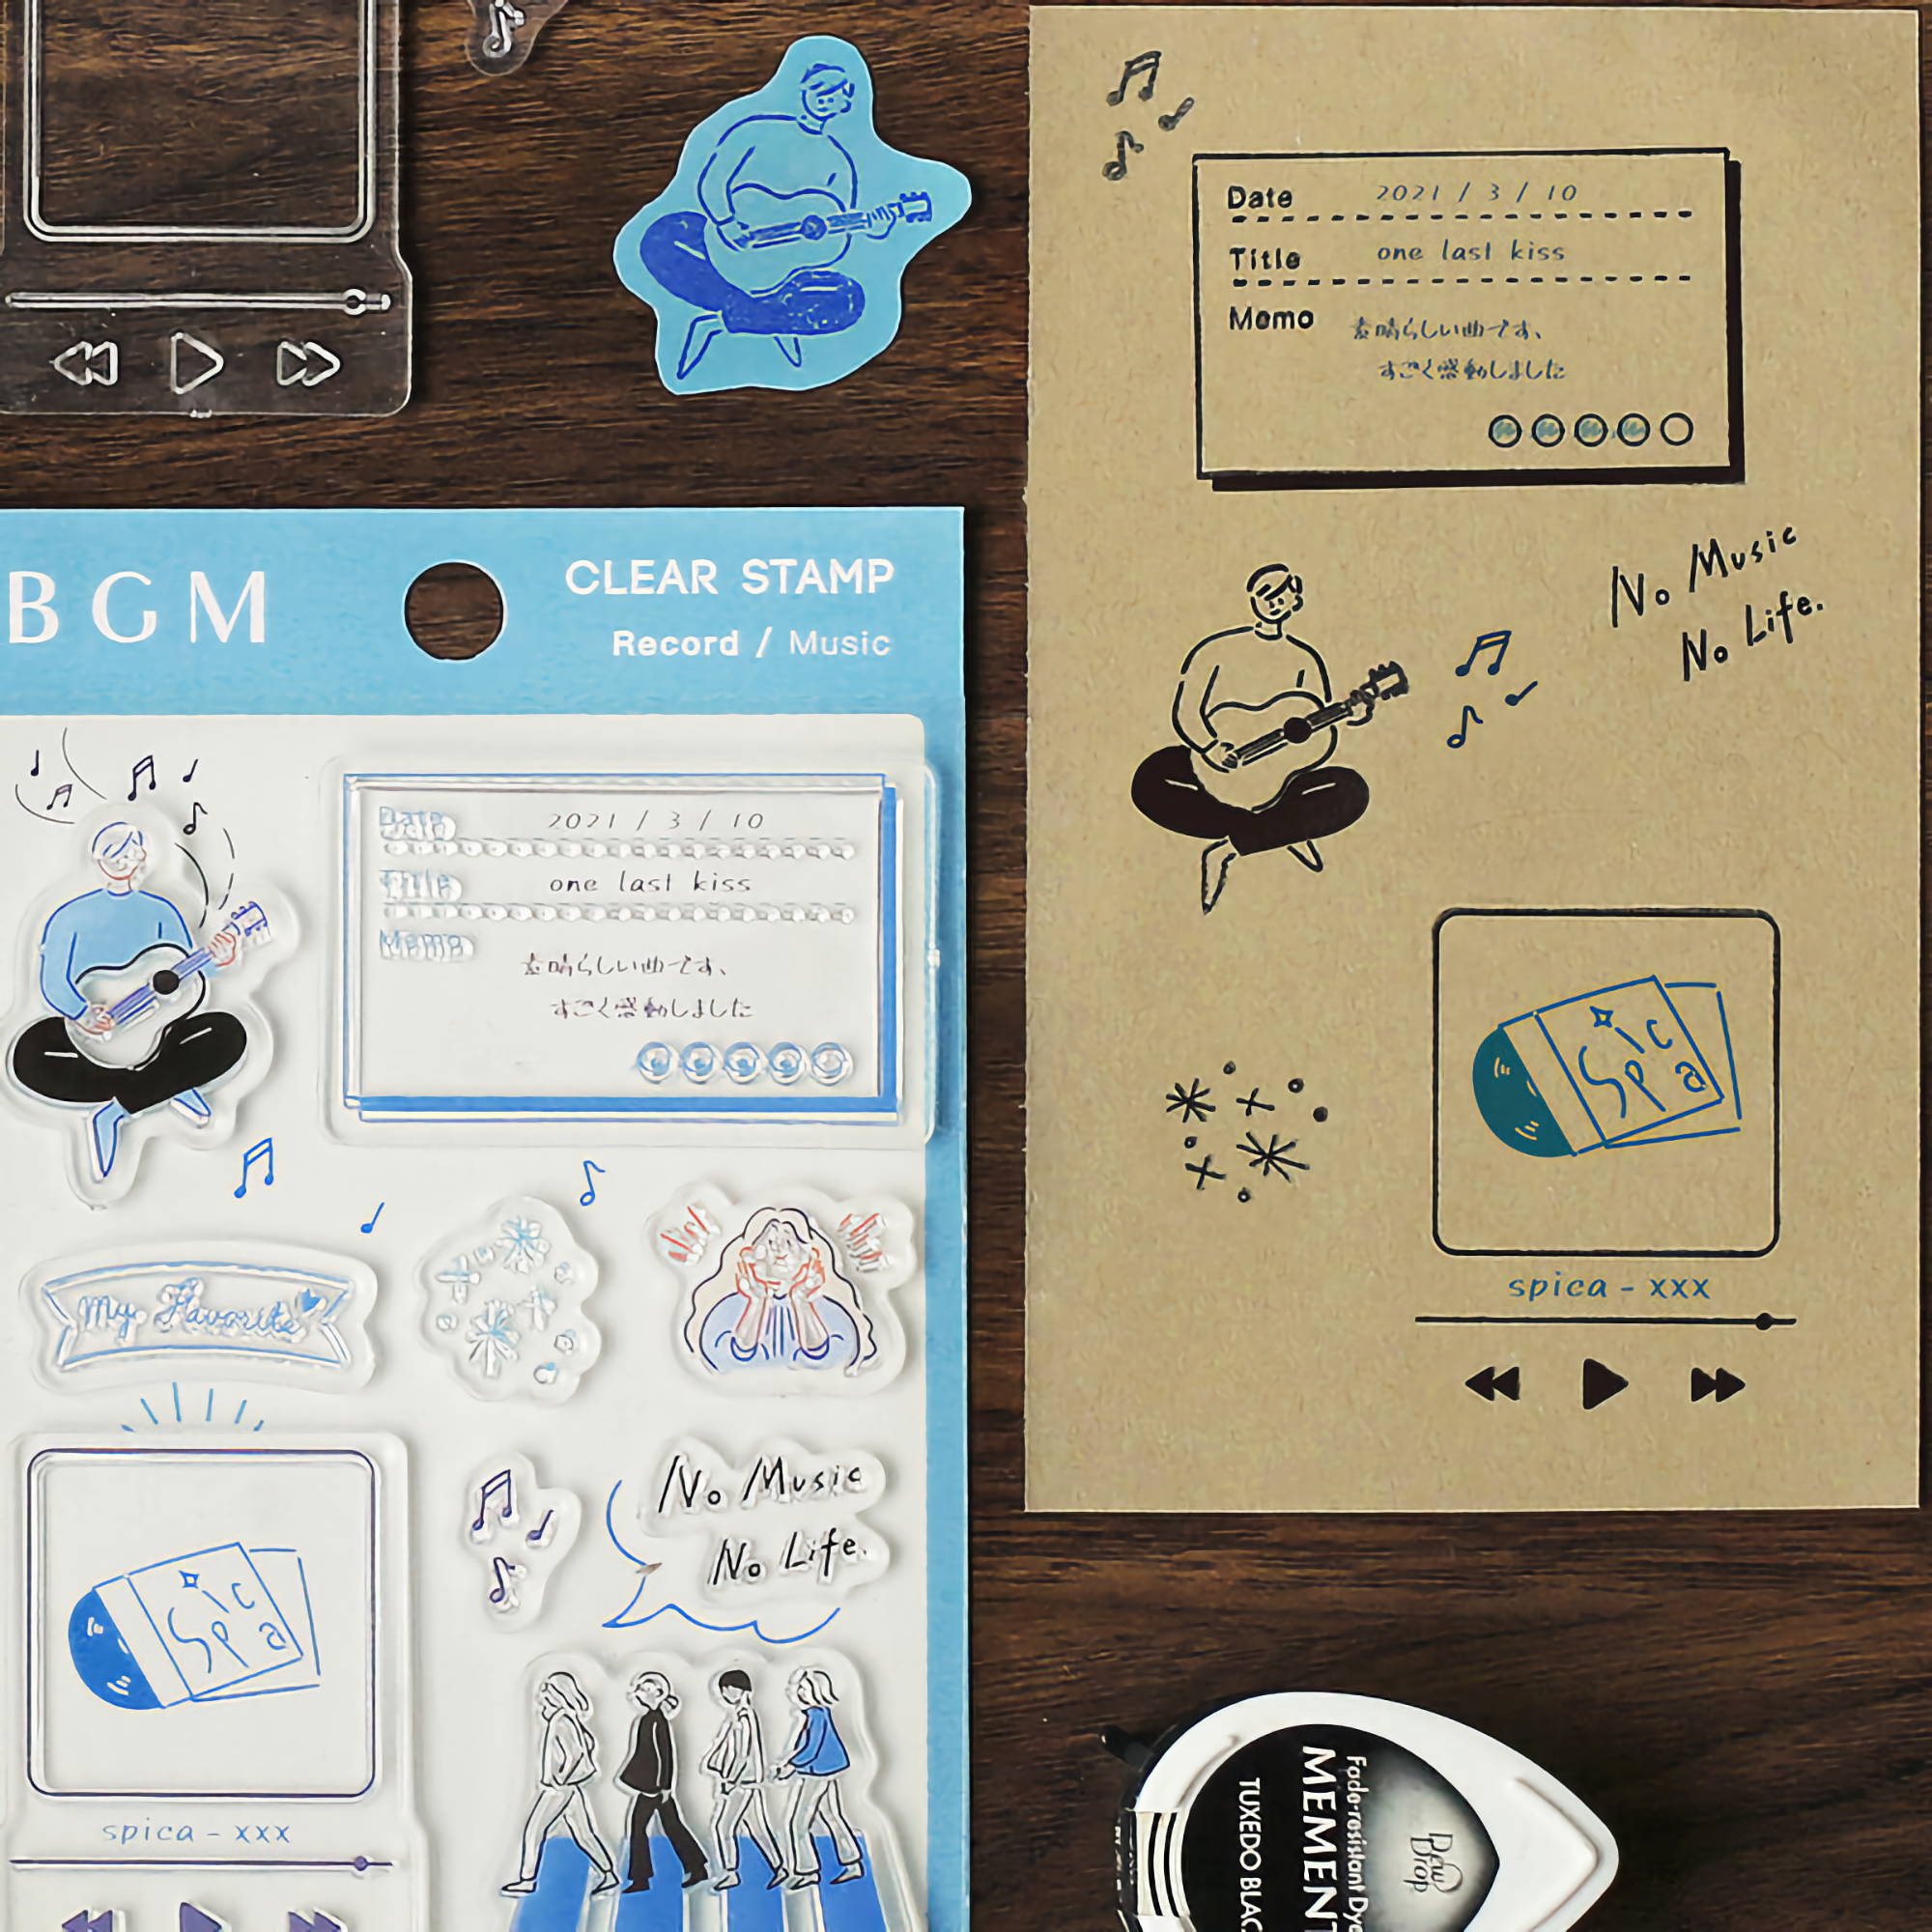 BGM Clear Stamp Record Music